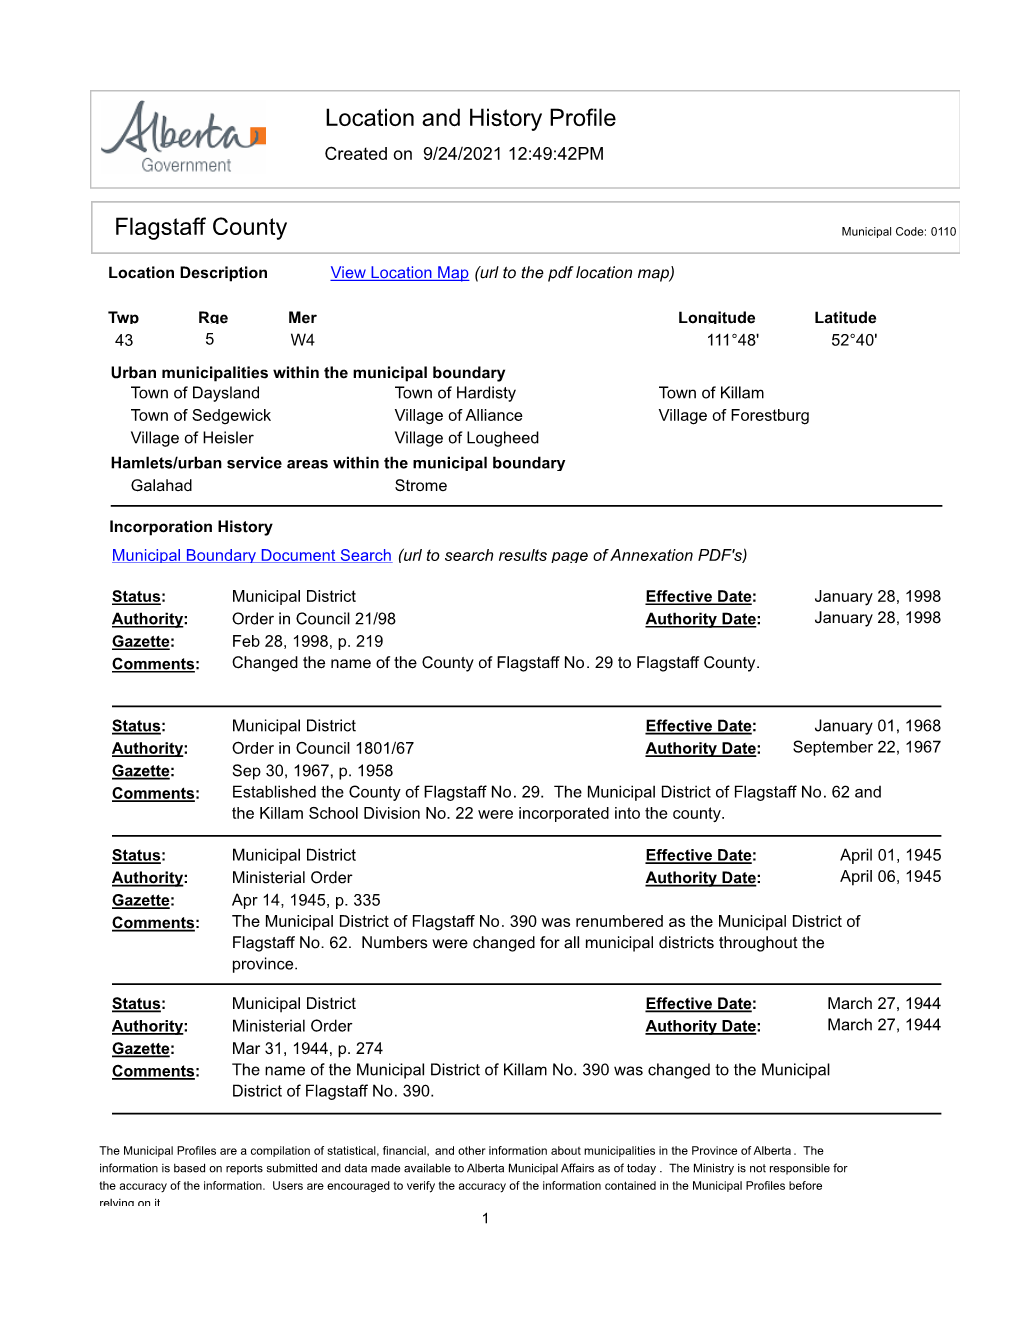 Location and History Profile Flagstaff County